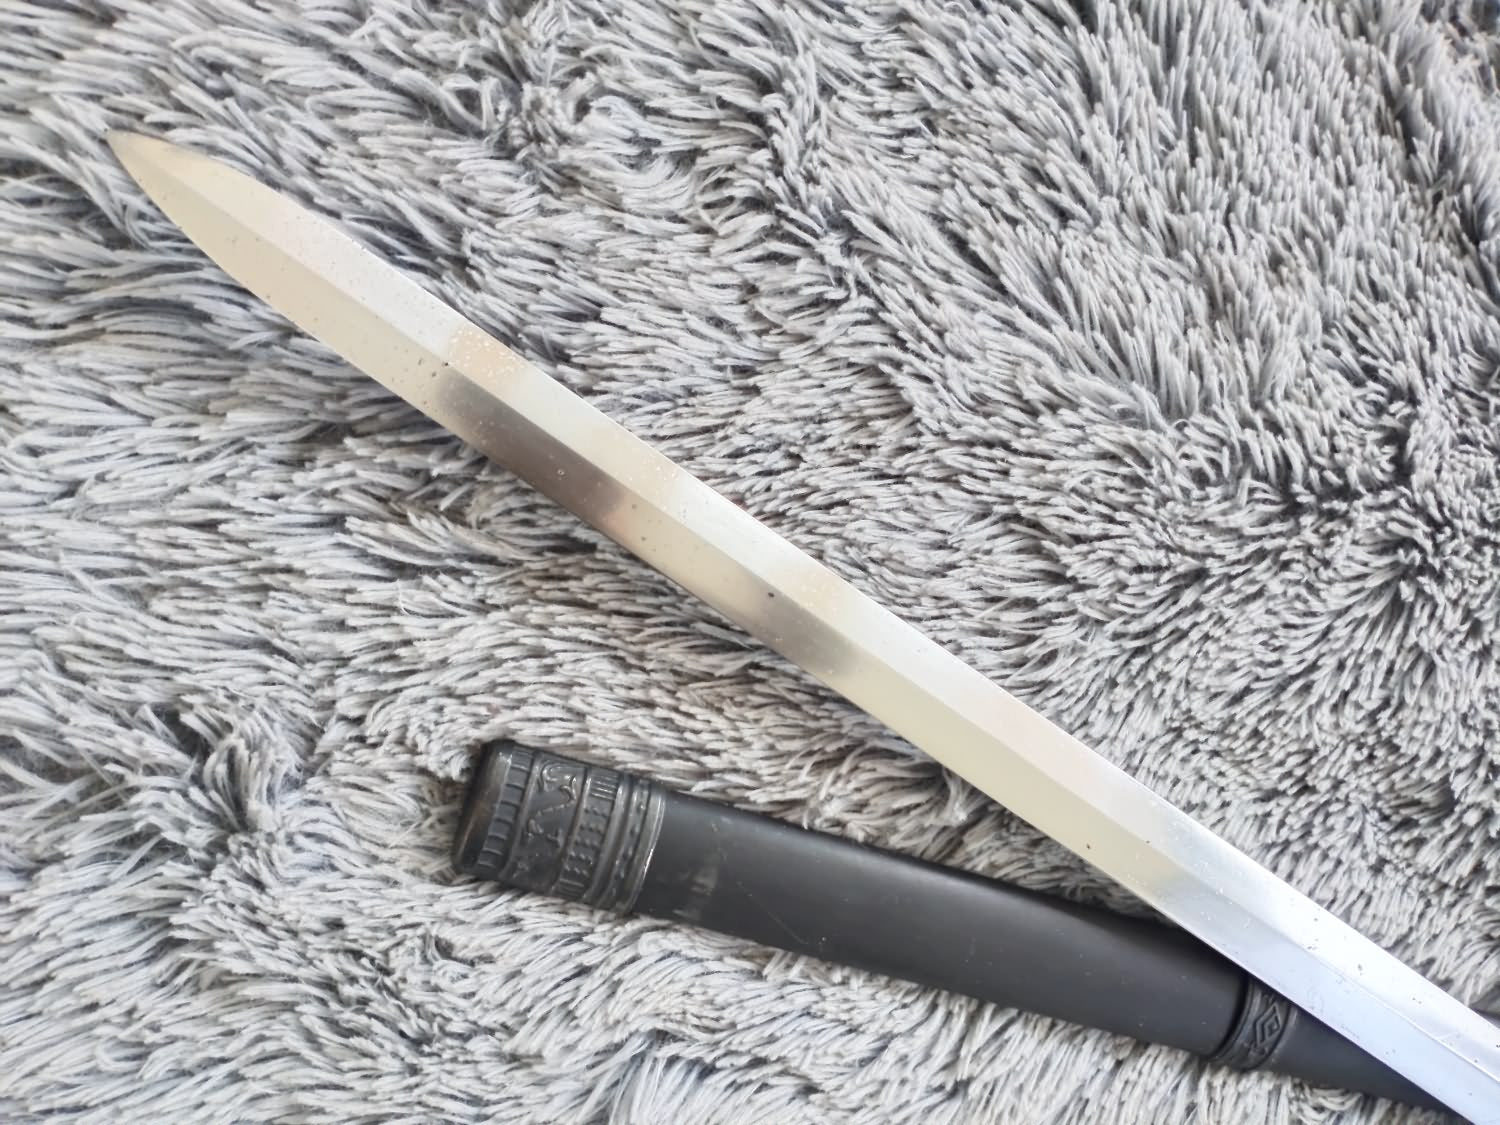 Handcrafted wolong jian Sword with Forged High Carbon Steel Blade and Alloy Fittings-Perfect for China kung fu